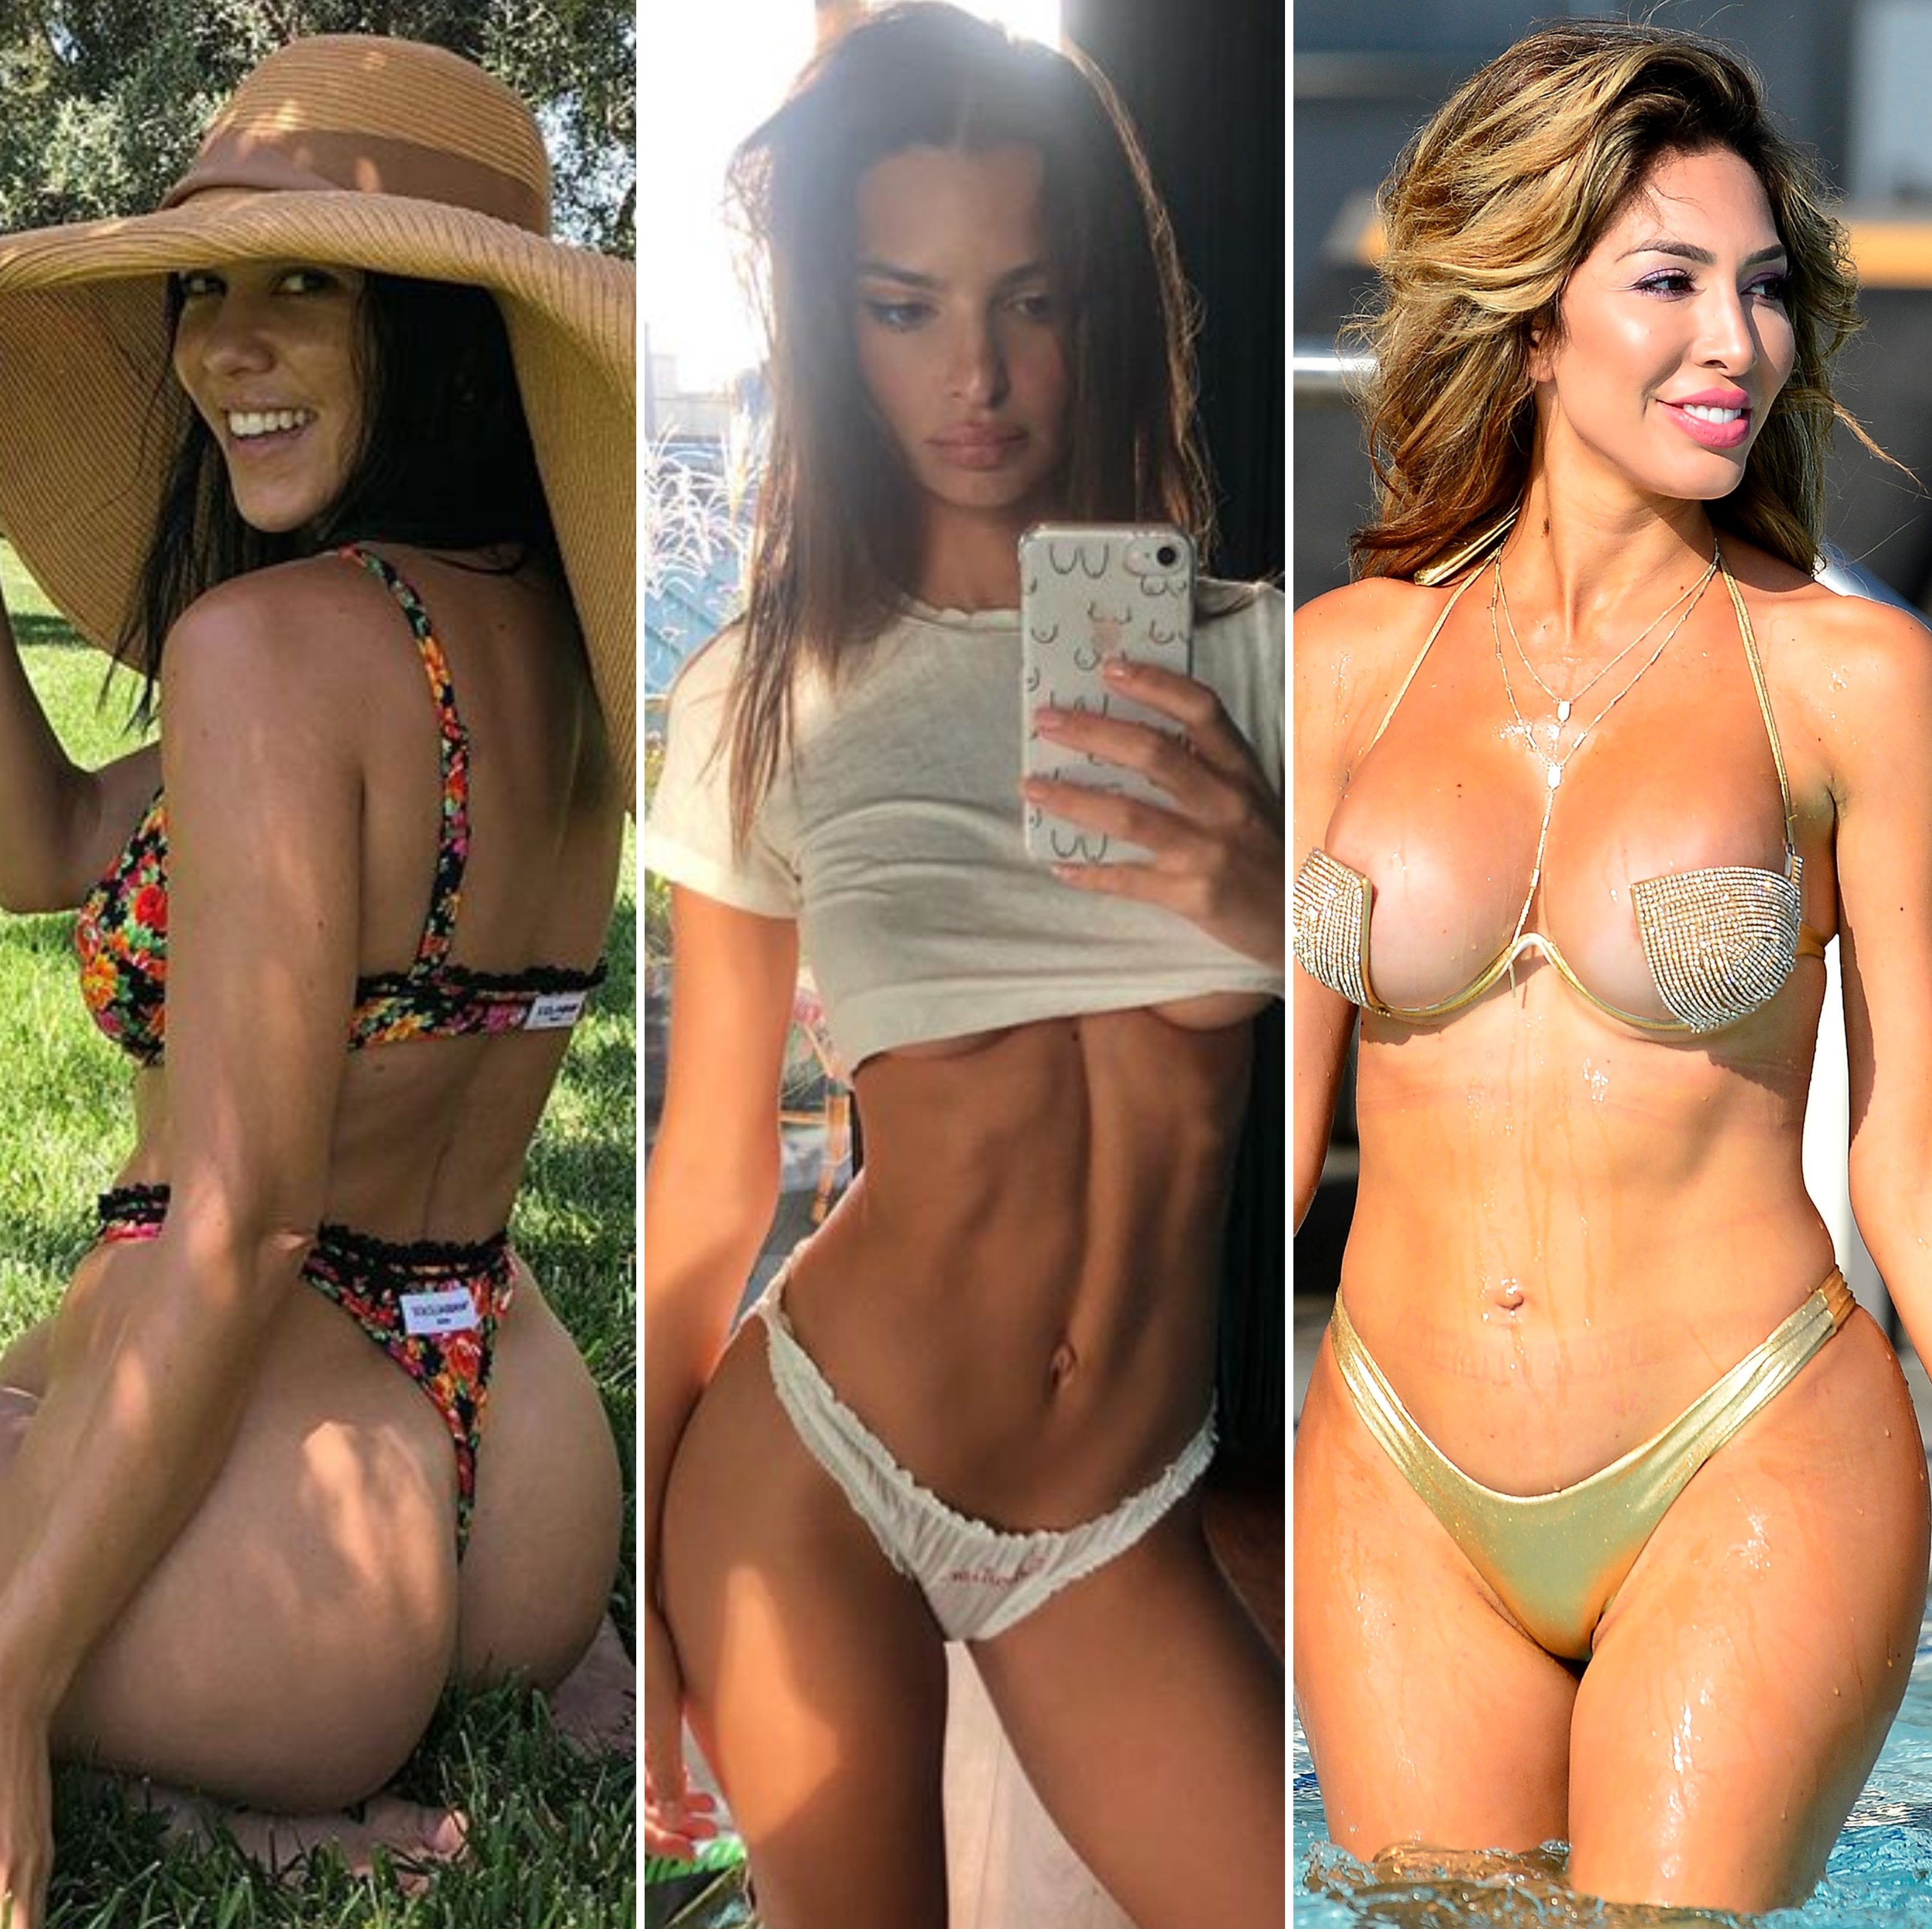 Naked Celebrity Girls - Stars Who Love Being Naked: Celebs Showing Skin, Going Nude